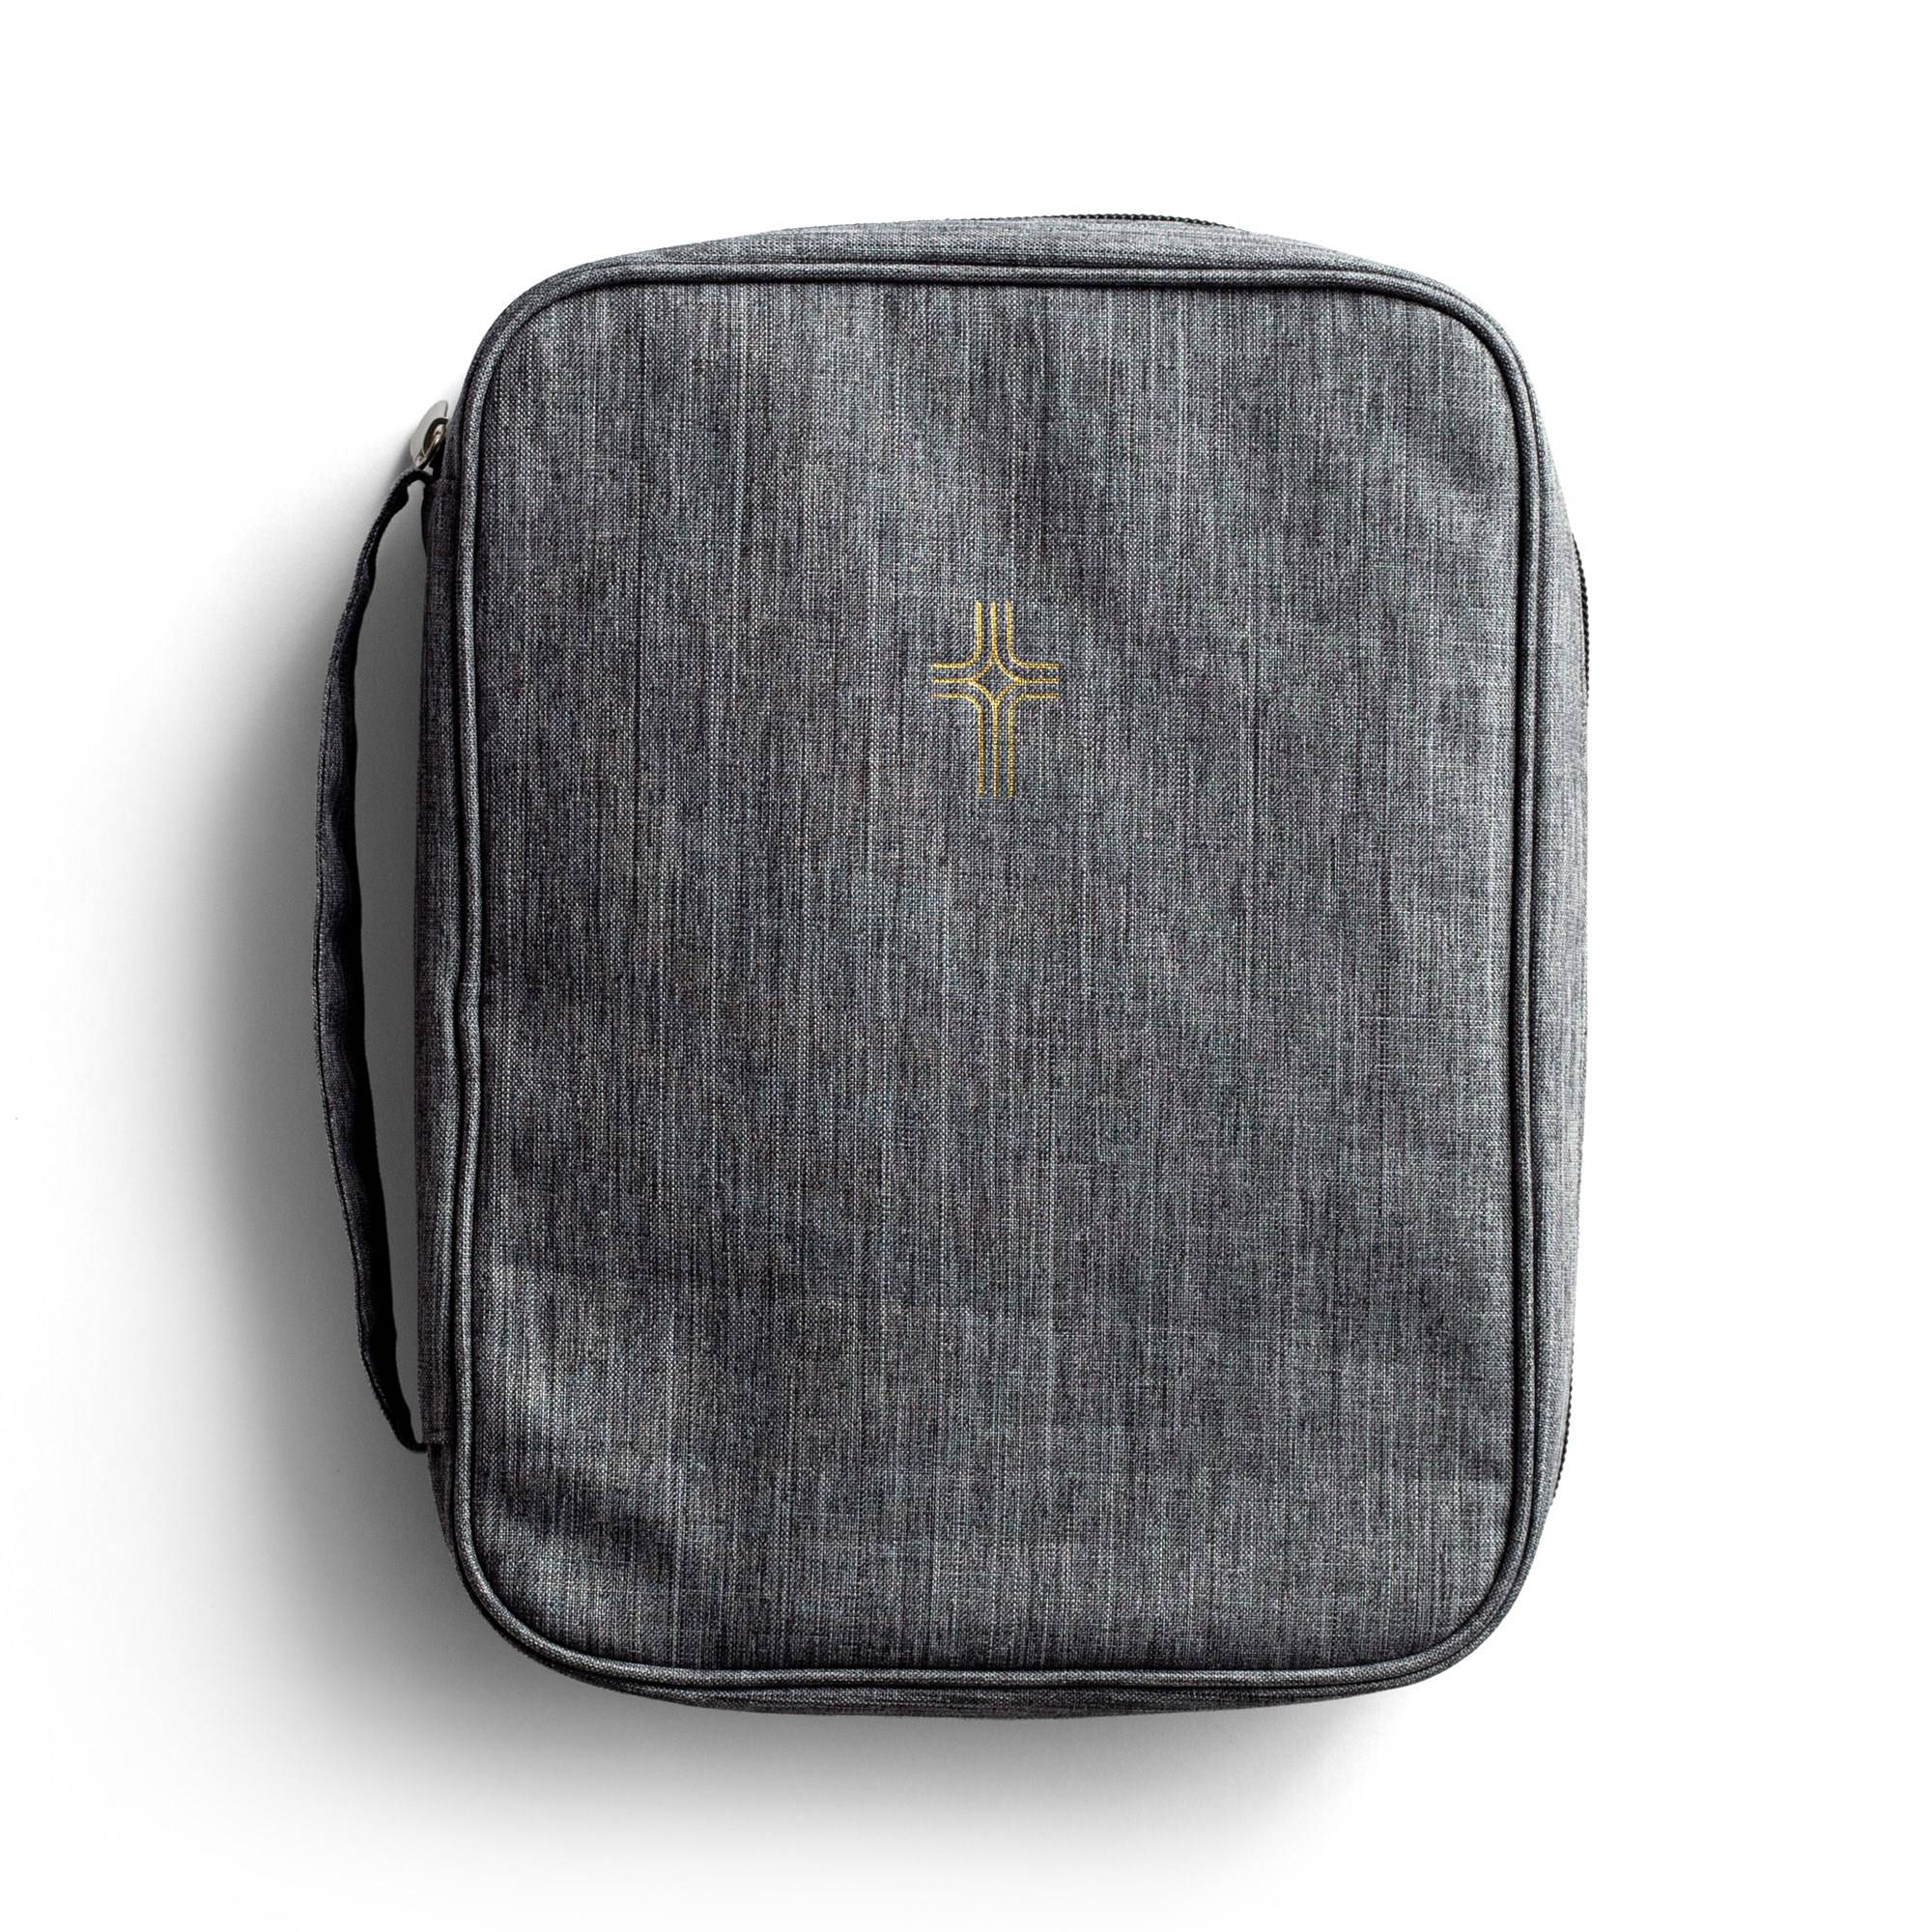 Dayspring Canvas Gold Cross Bible Cover, Navy